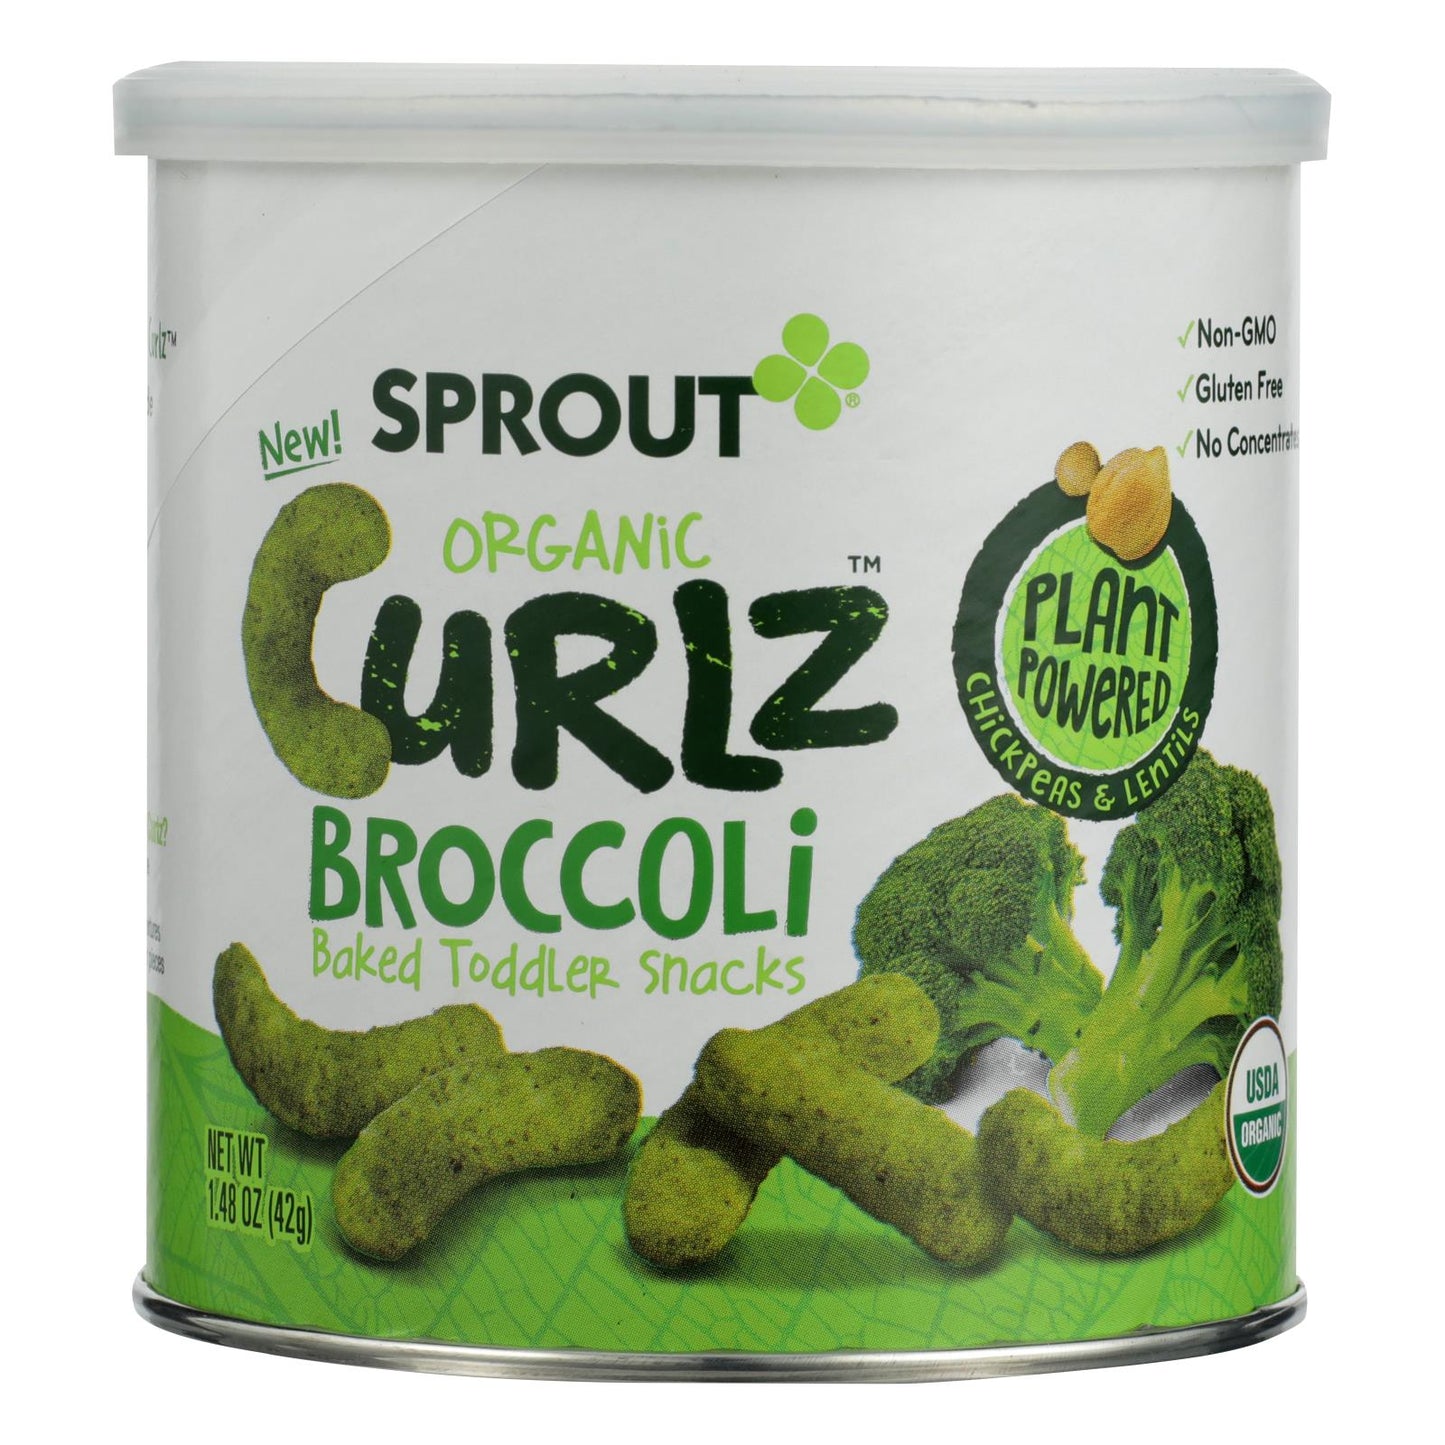 Sprout Organic Broccoli Curlz Baked Toddler Snacks  - Case Of 6 - 1.48 Oz | OnlyNaturals.us